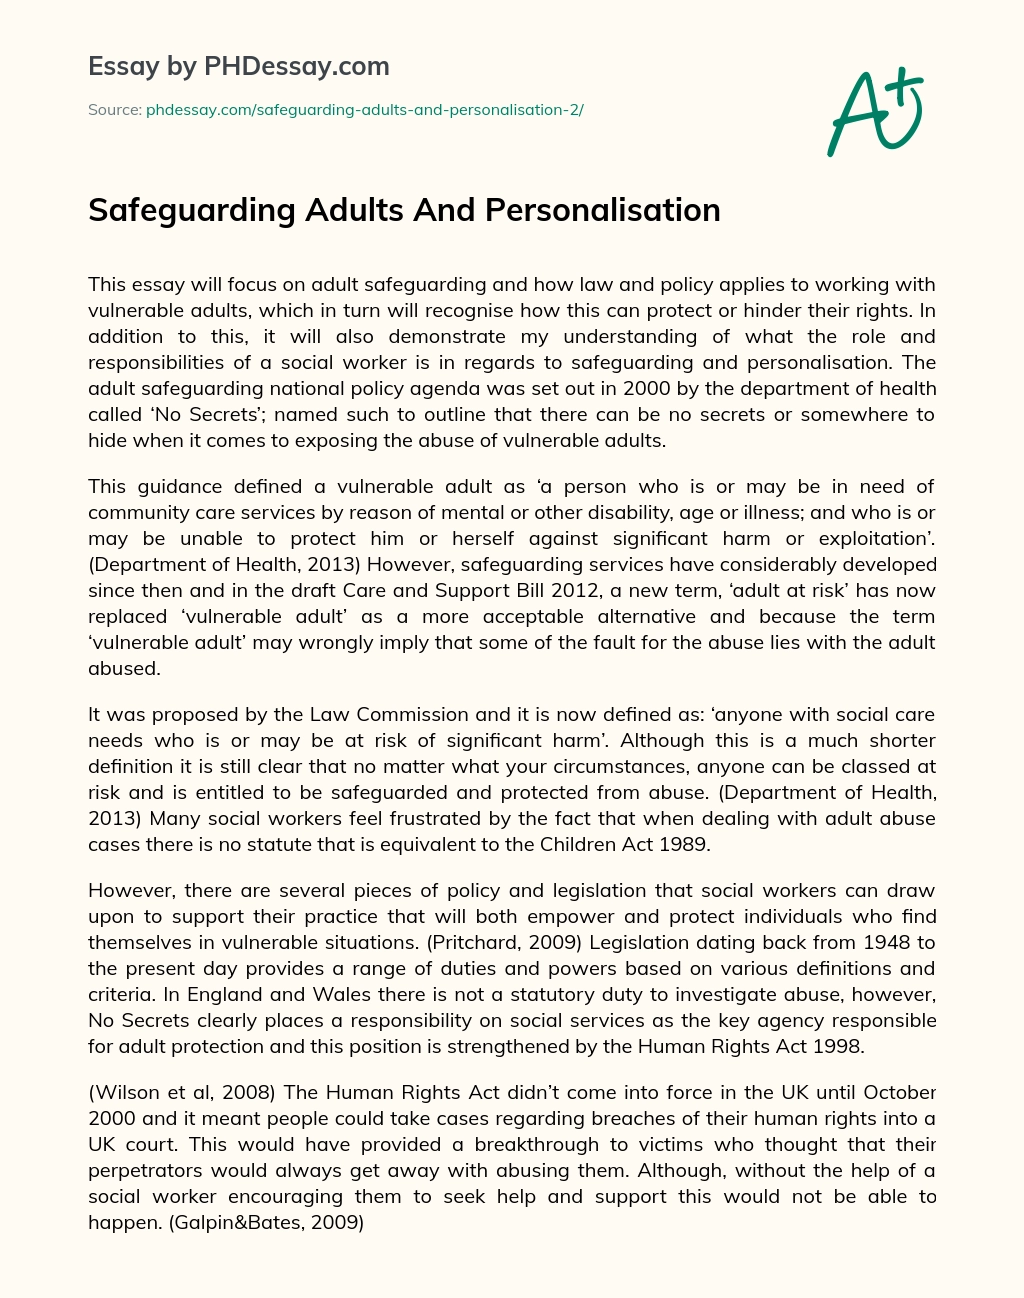 Safeguarding Adults And Personalisation essay